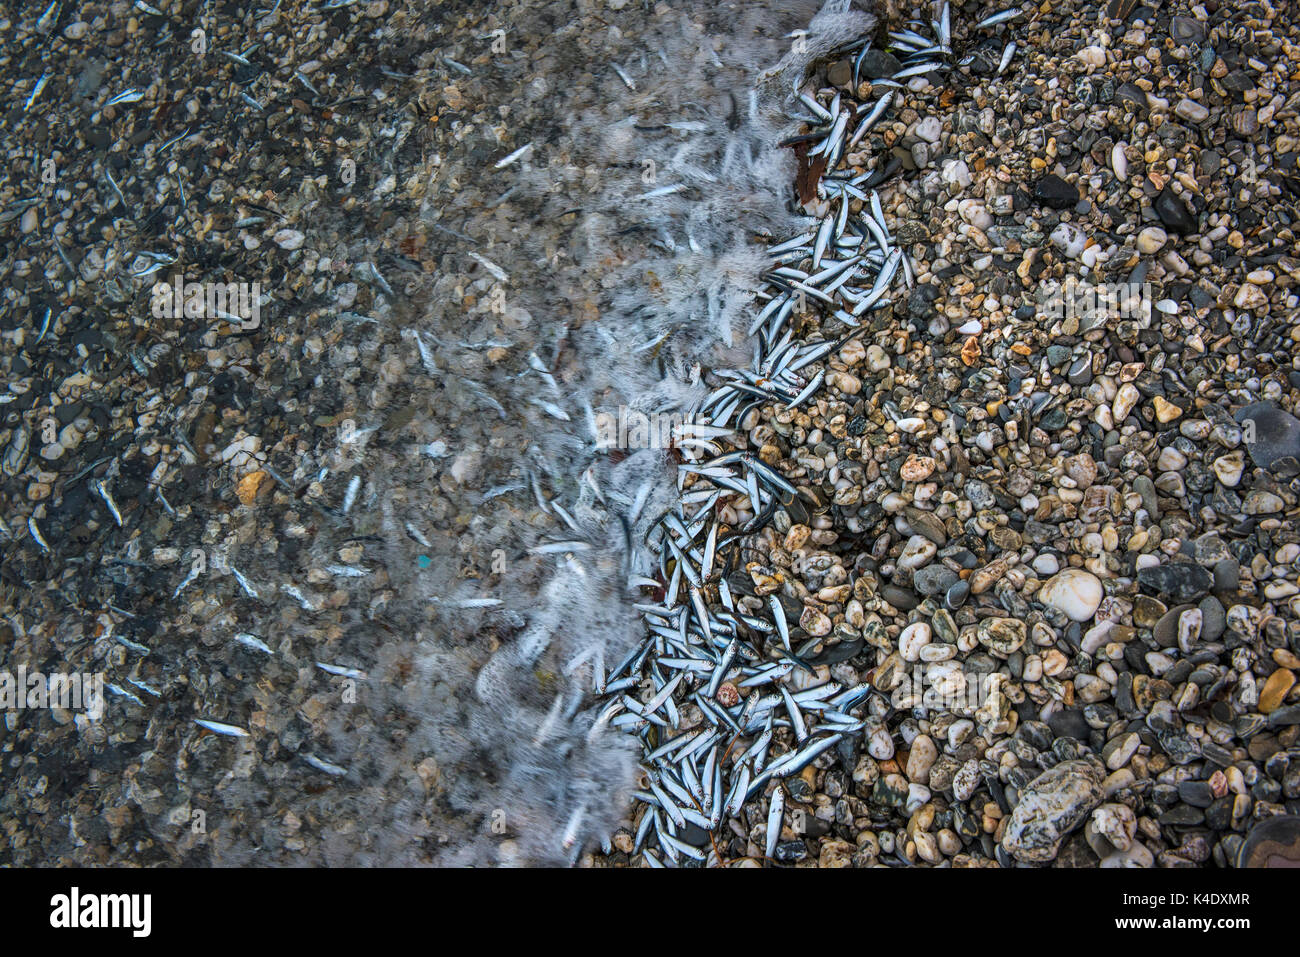 Dying sand eels washed up on the shore of a shingle beach. Stock Photo